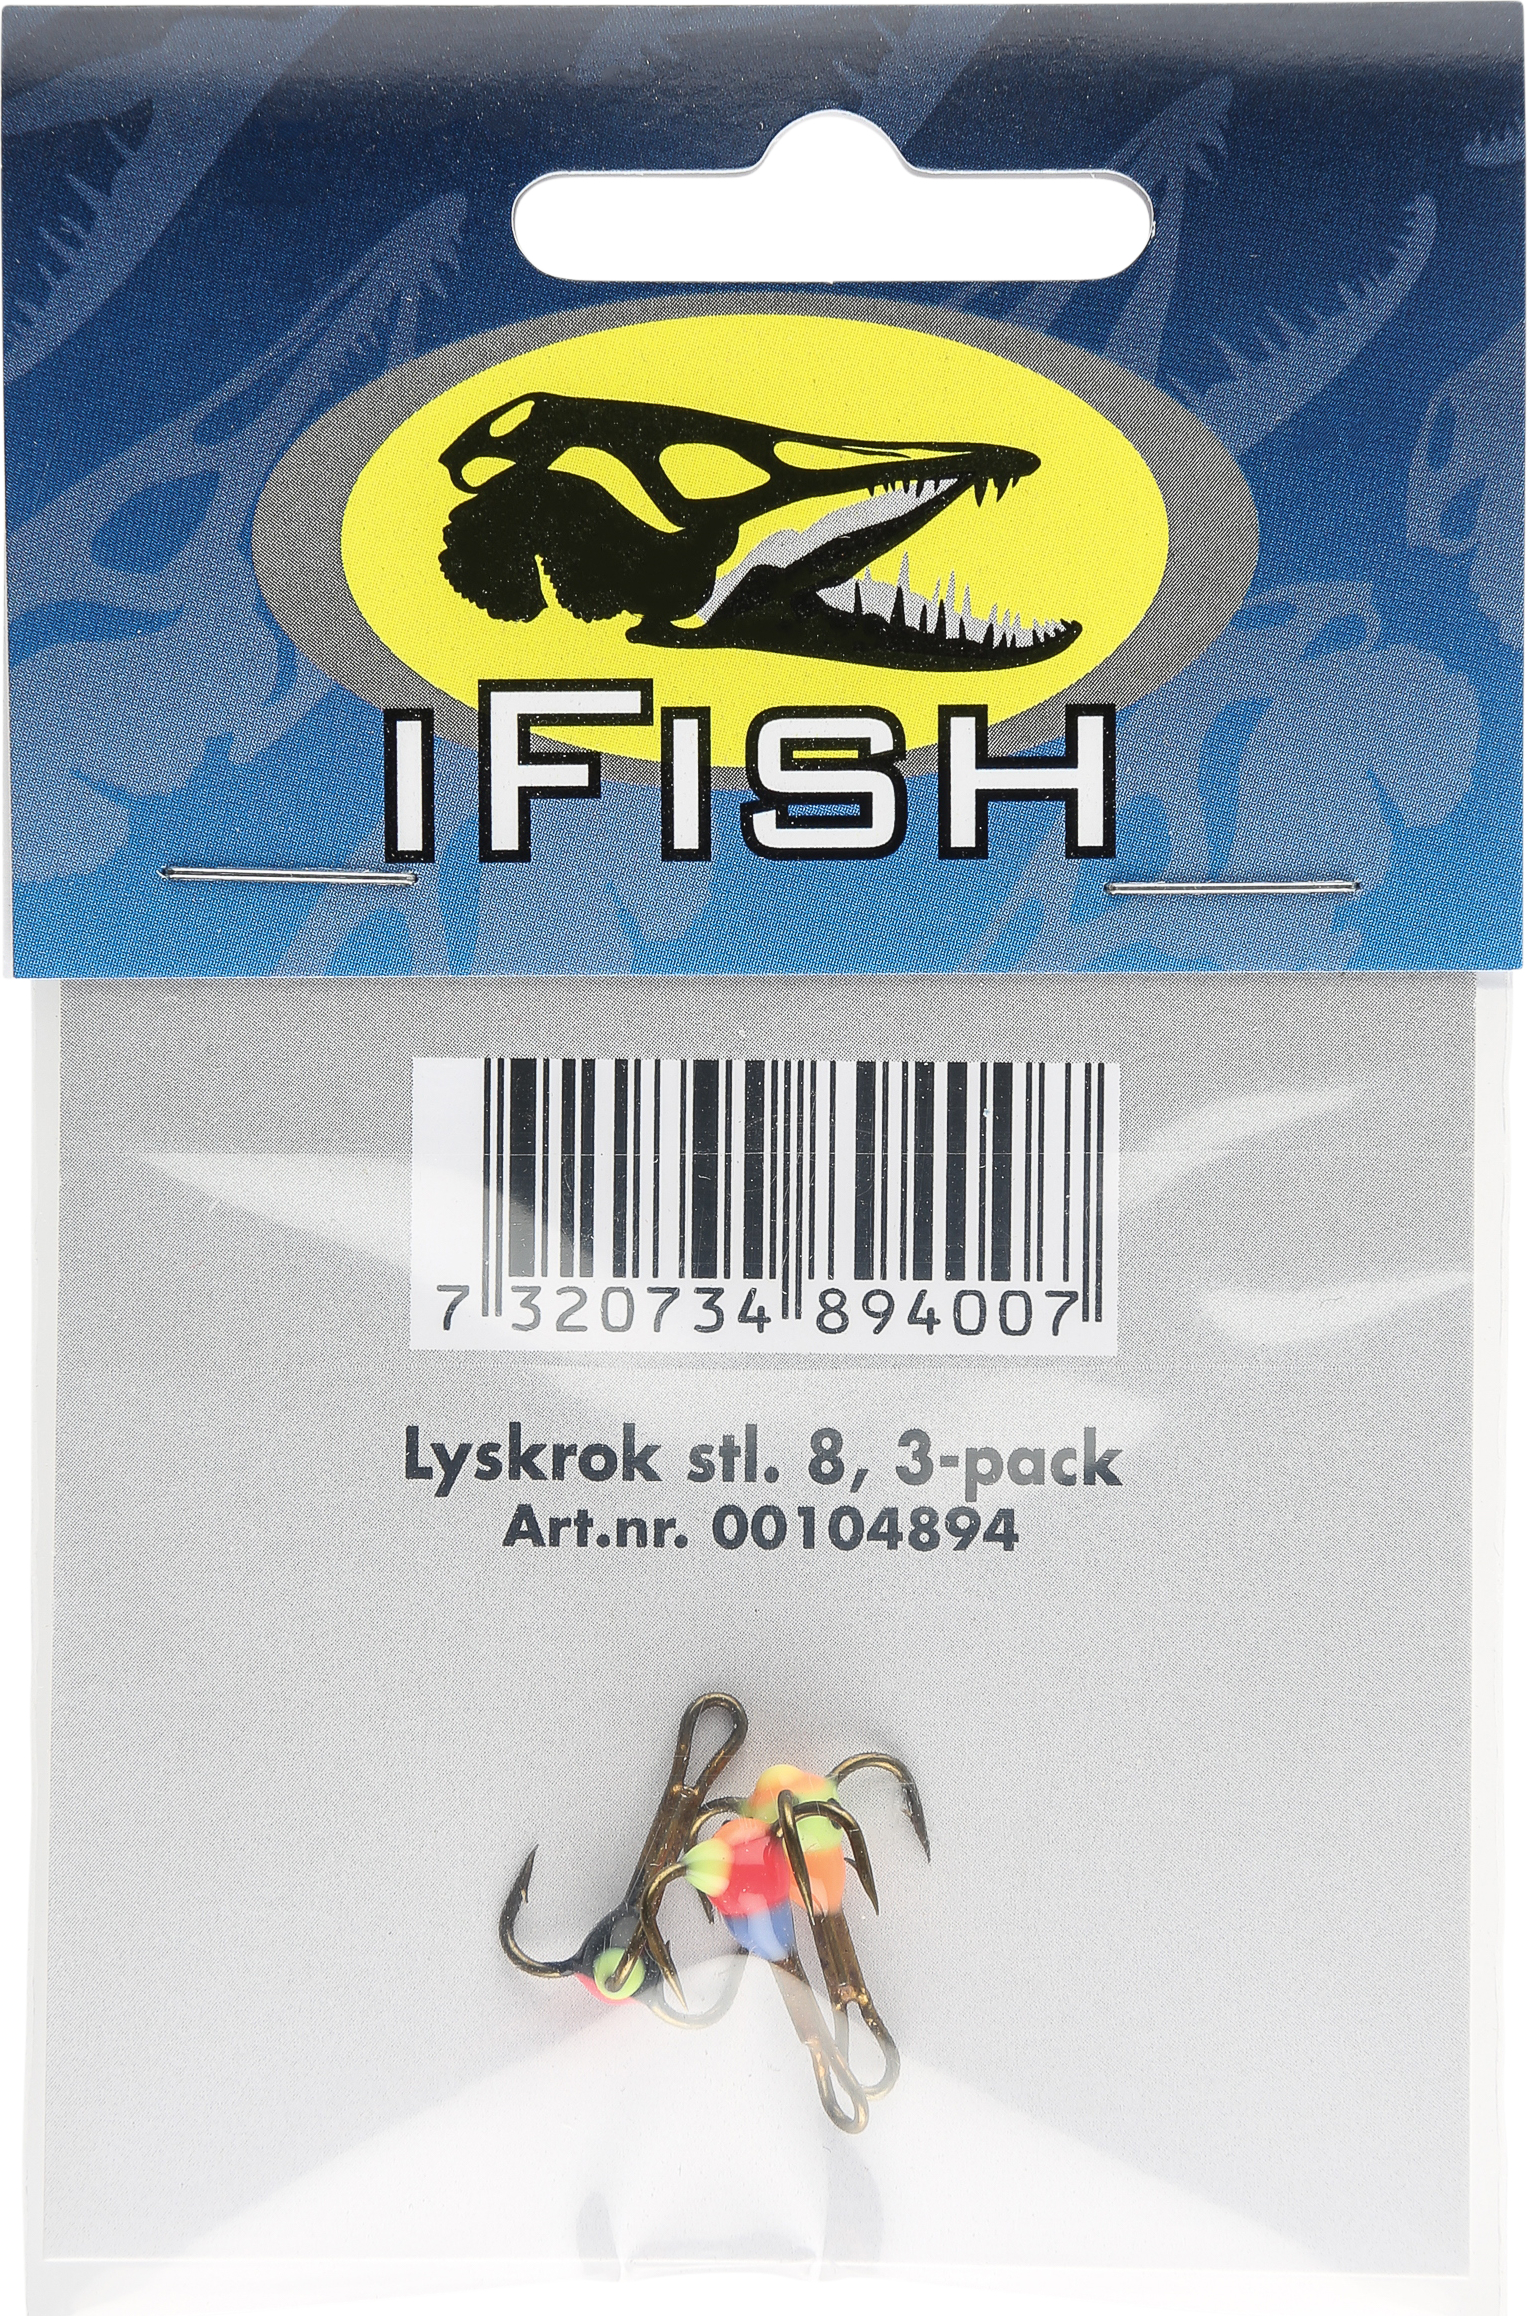 iFish Fiskpinne 4m Pink, Buy iFish Fiskpinne 4m Pink here